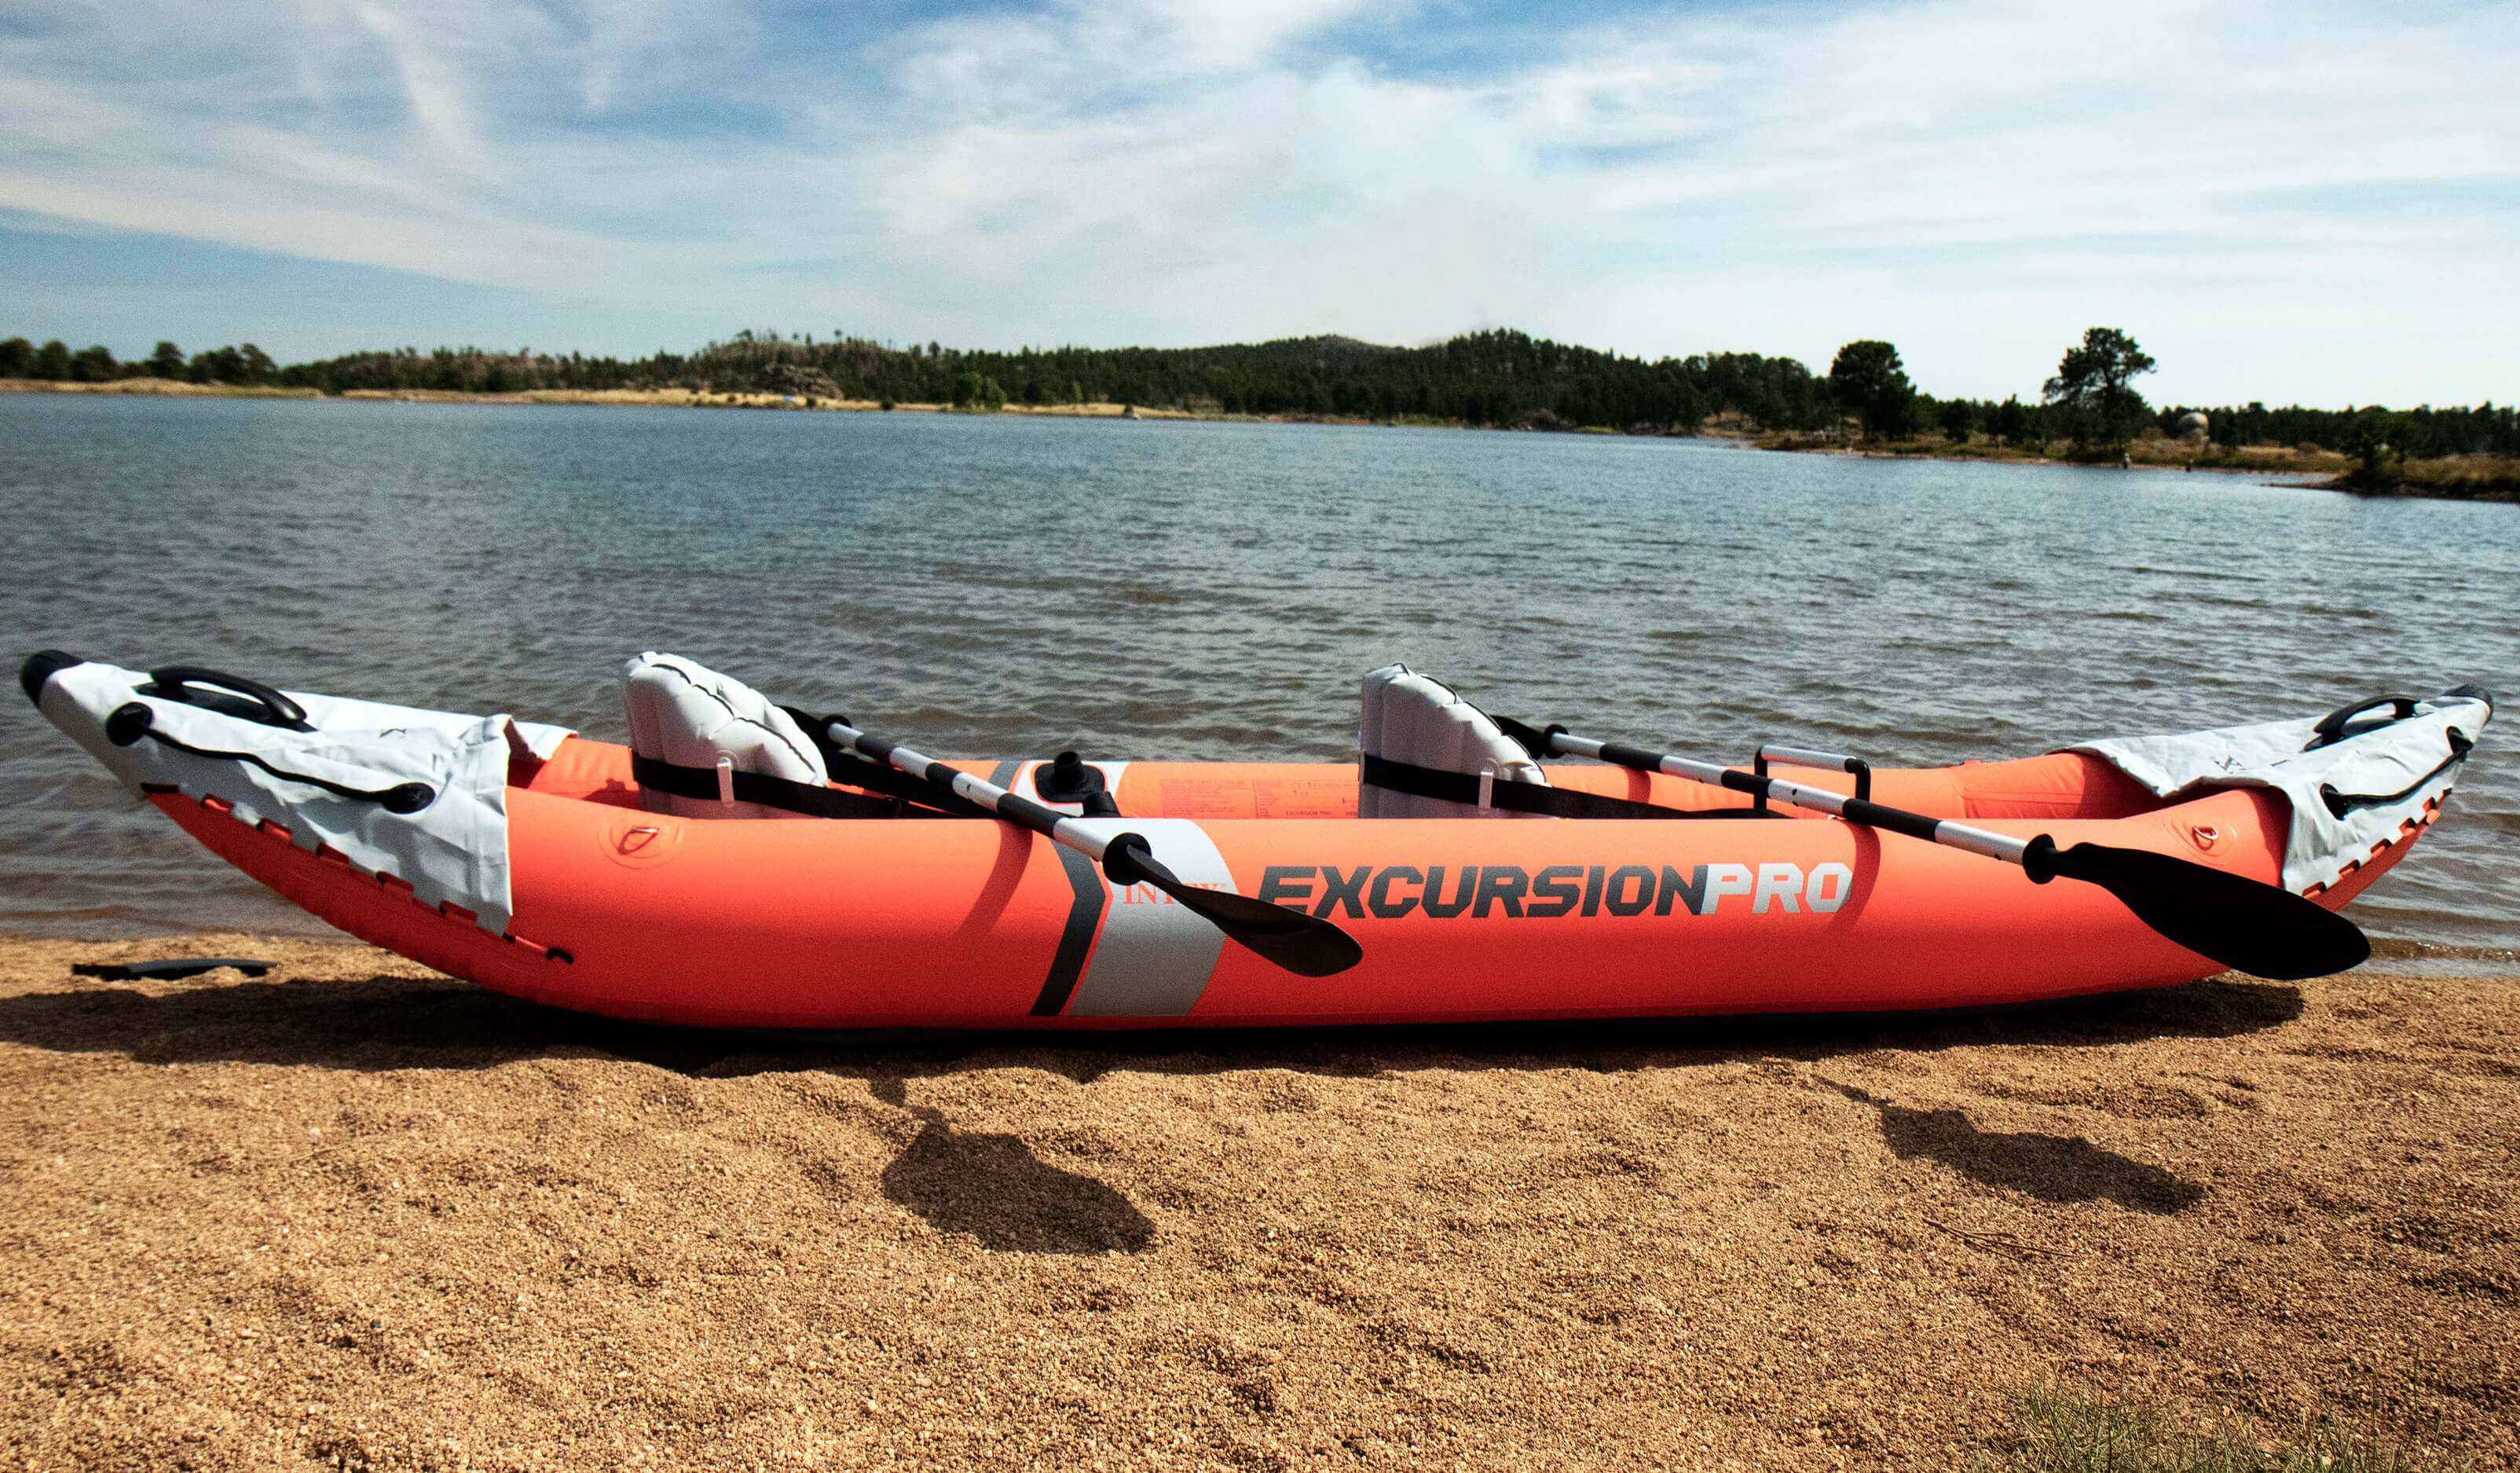 Intex Excursion Pro Inflatable Fishing Kayak – Tough, Affordable and Safe